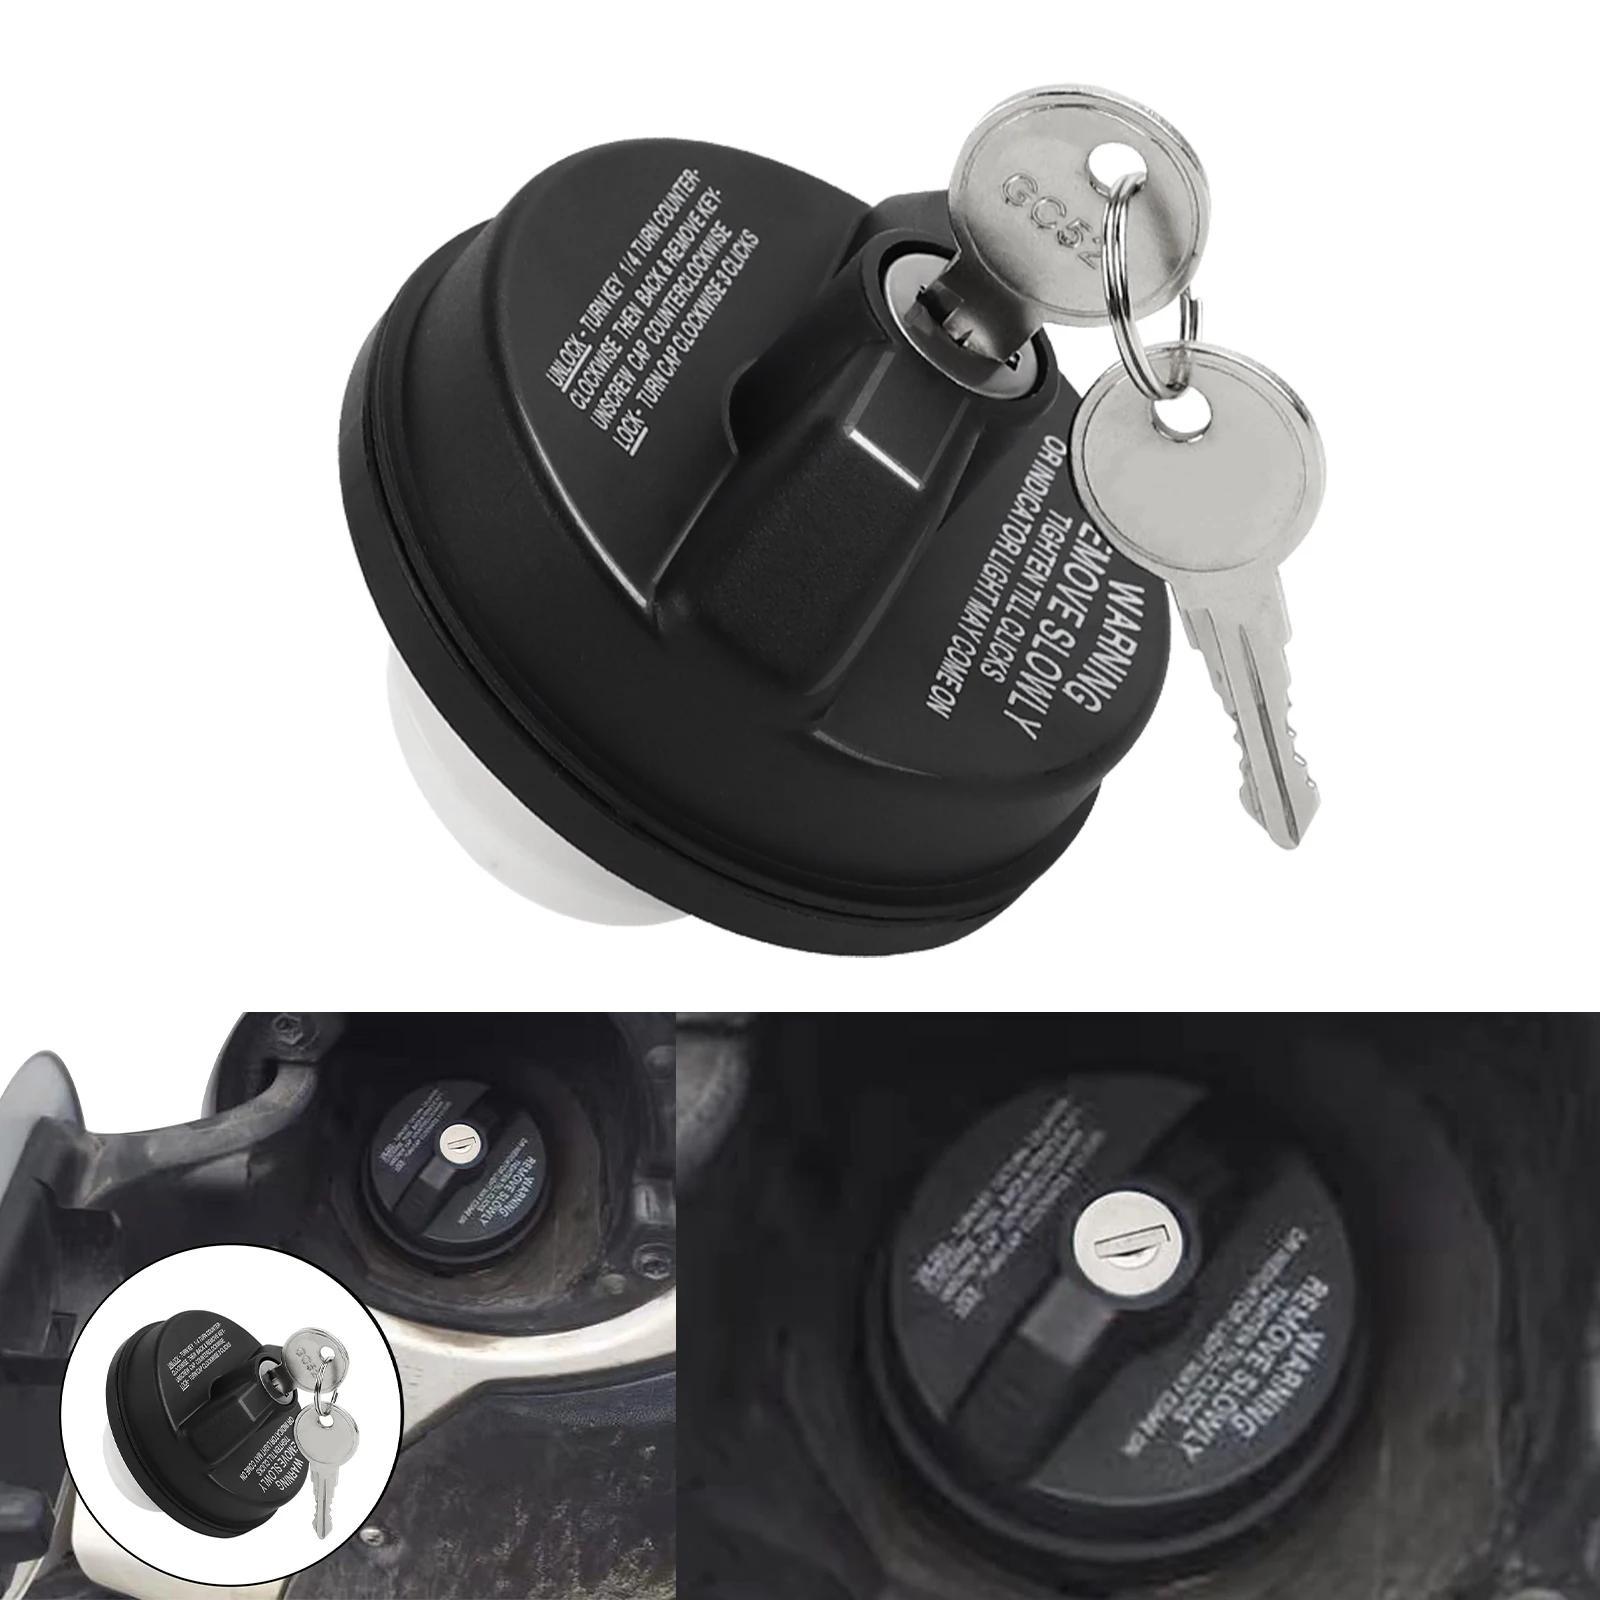 

Gas Cap Locking Gas Fuel Tank Cap With Keys For , For Toyota, Tacoma, For Ford, For , For Honda, For , For , For Mazda, For , For - High-quality Plastic Material